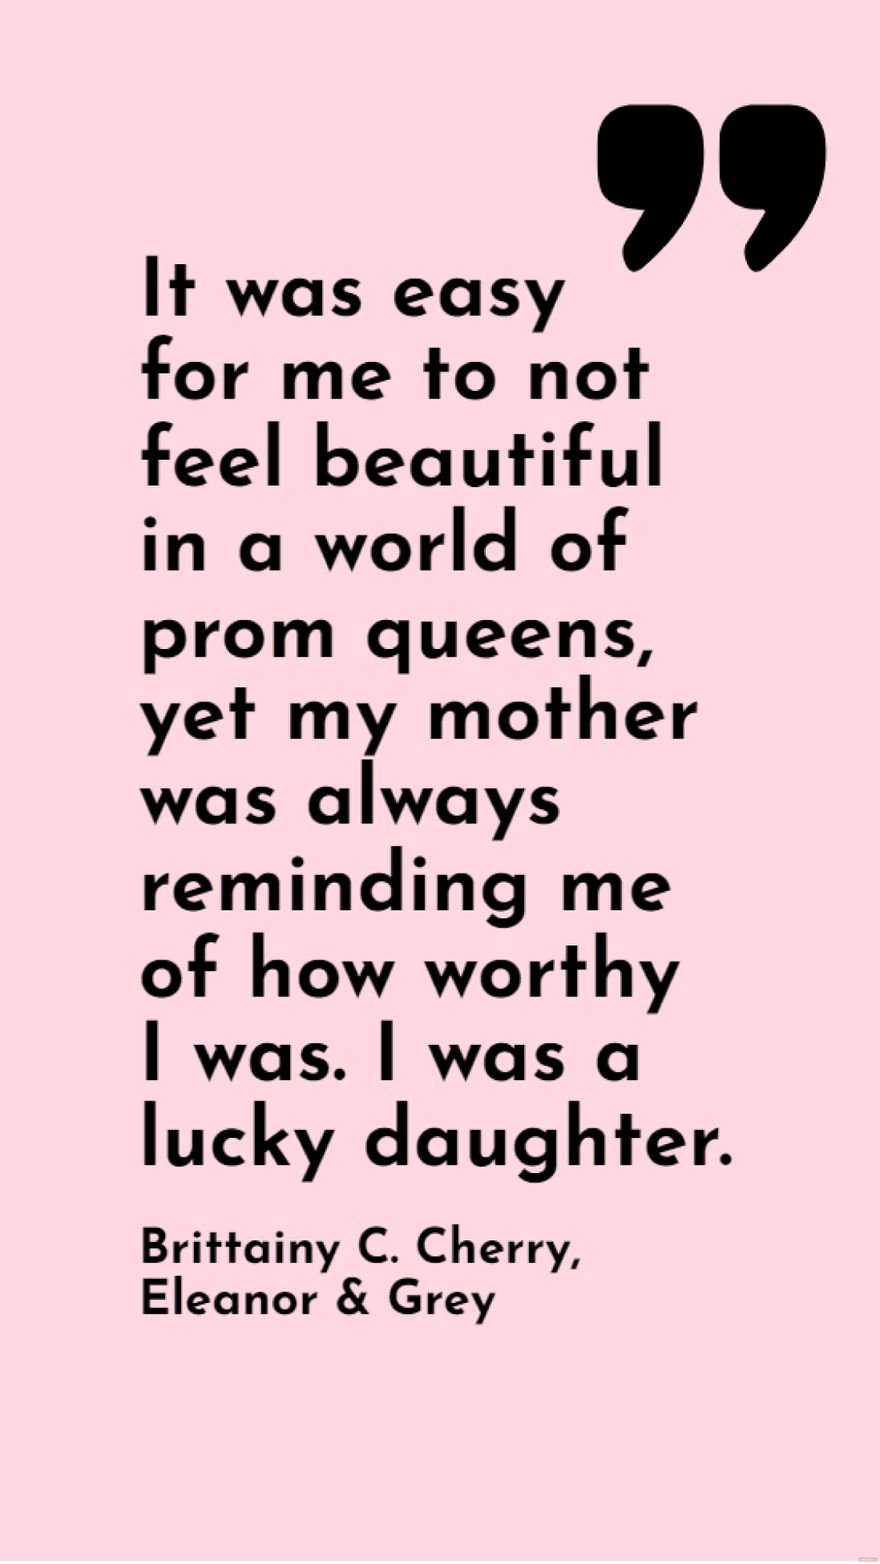 Free Brittainy C. Cherry, Eleanor & Grey - It was easy for me to not feel beautiful in a world of prom queens, yet my mother was always reminding me of how worthy I was. I was a lucky daughter. in JPG